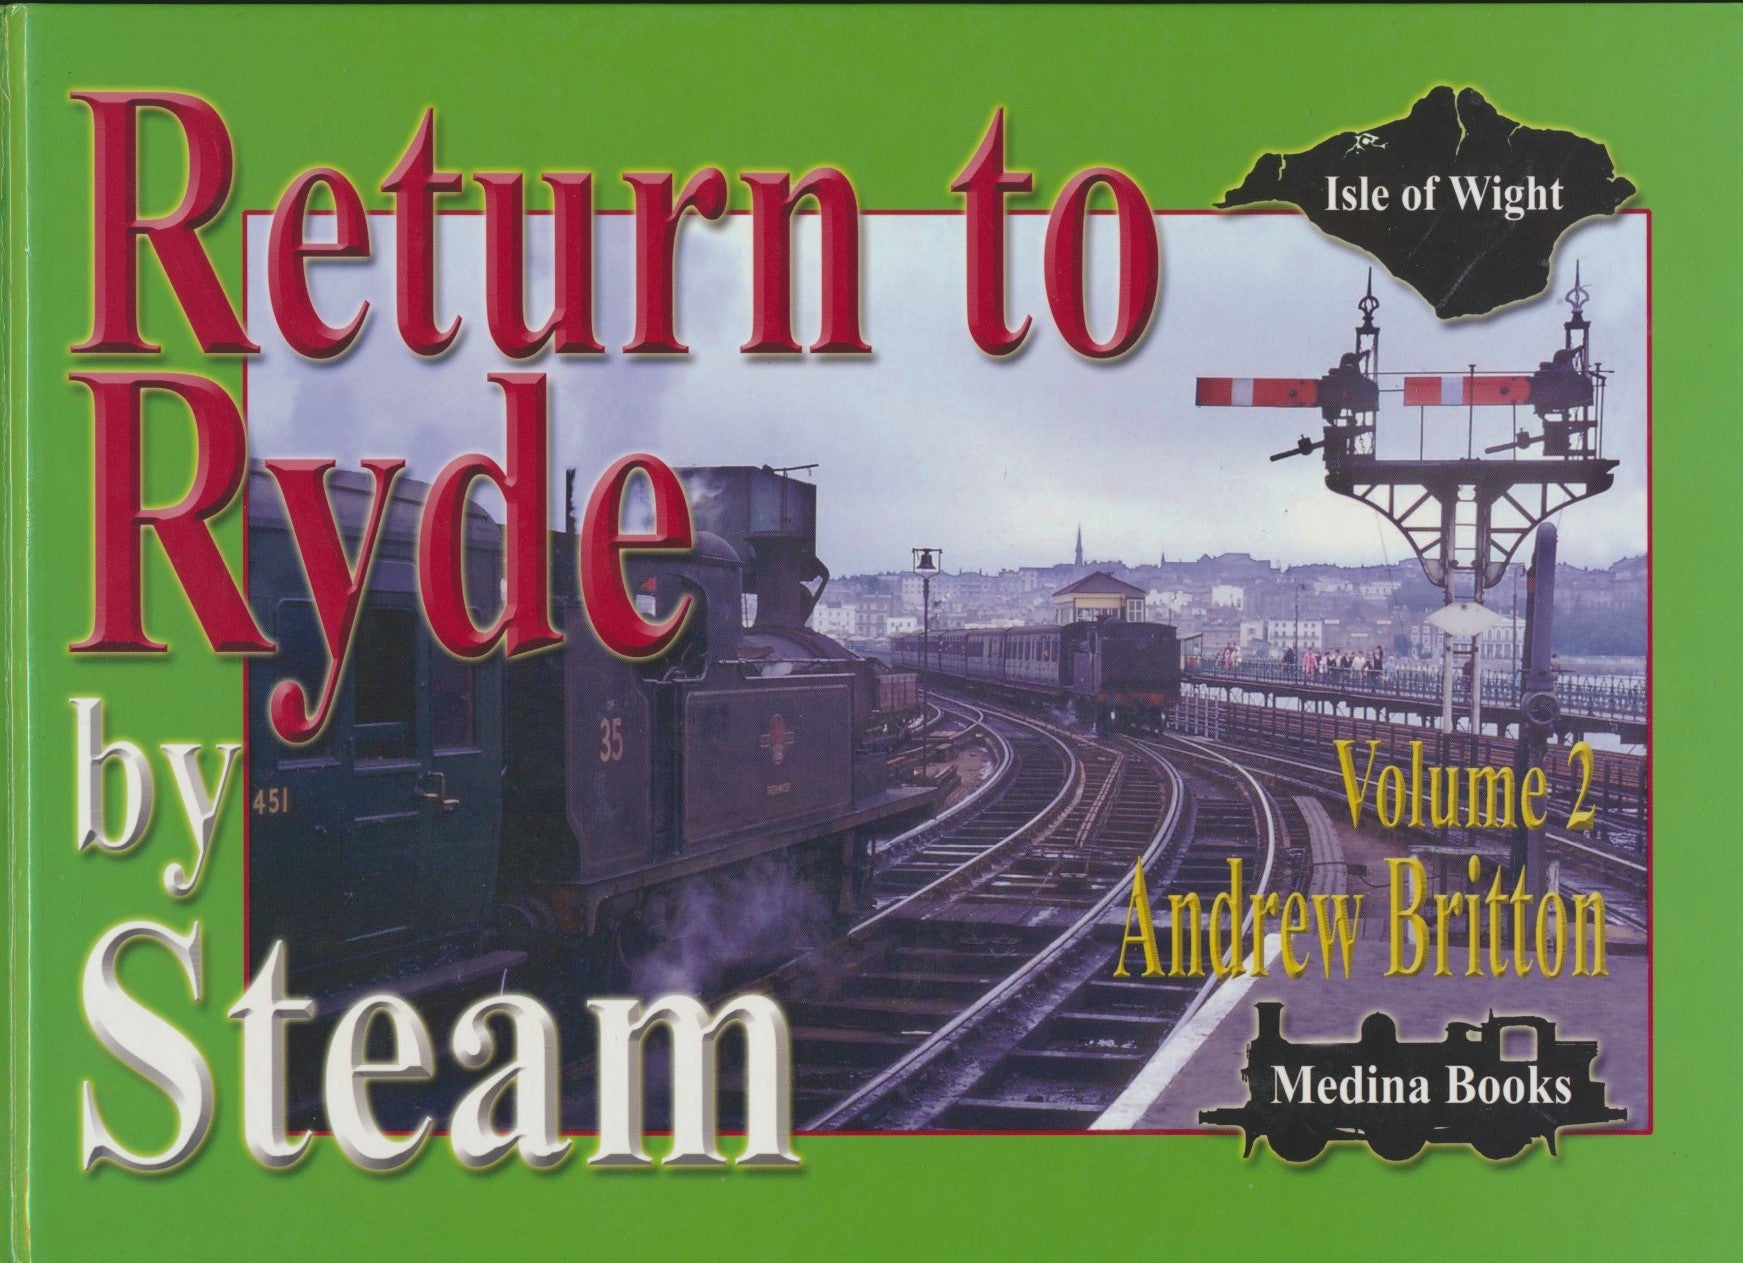 Return to Ryde by Steam Volume 2